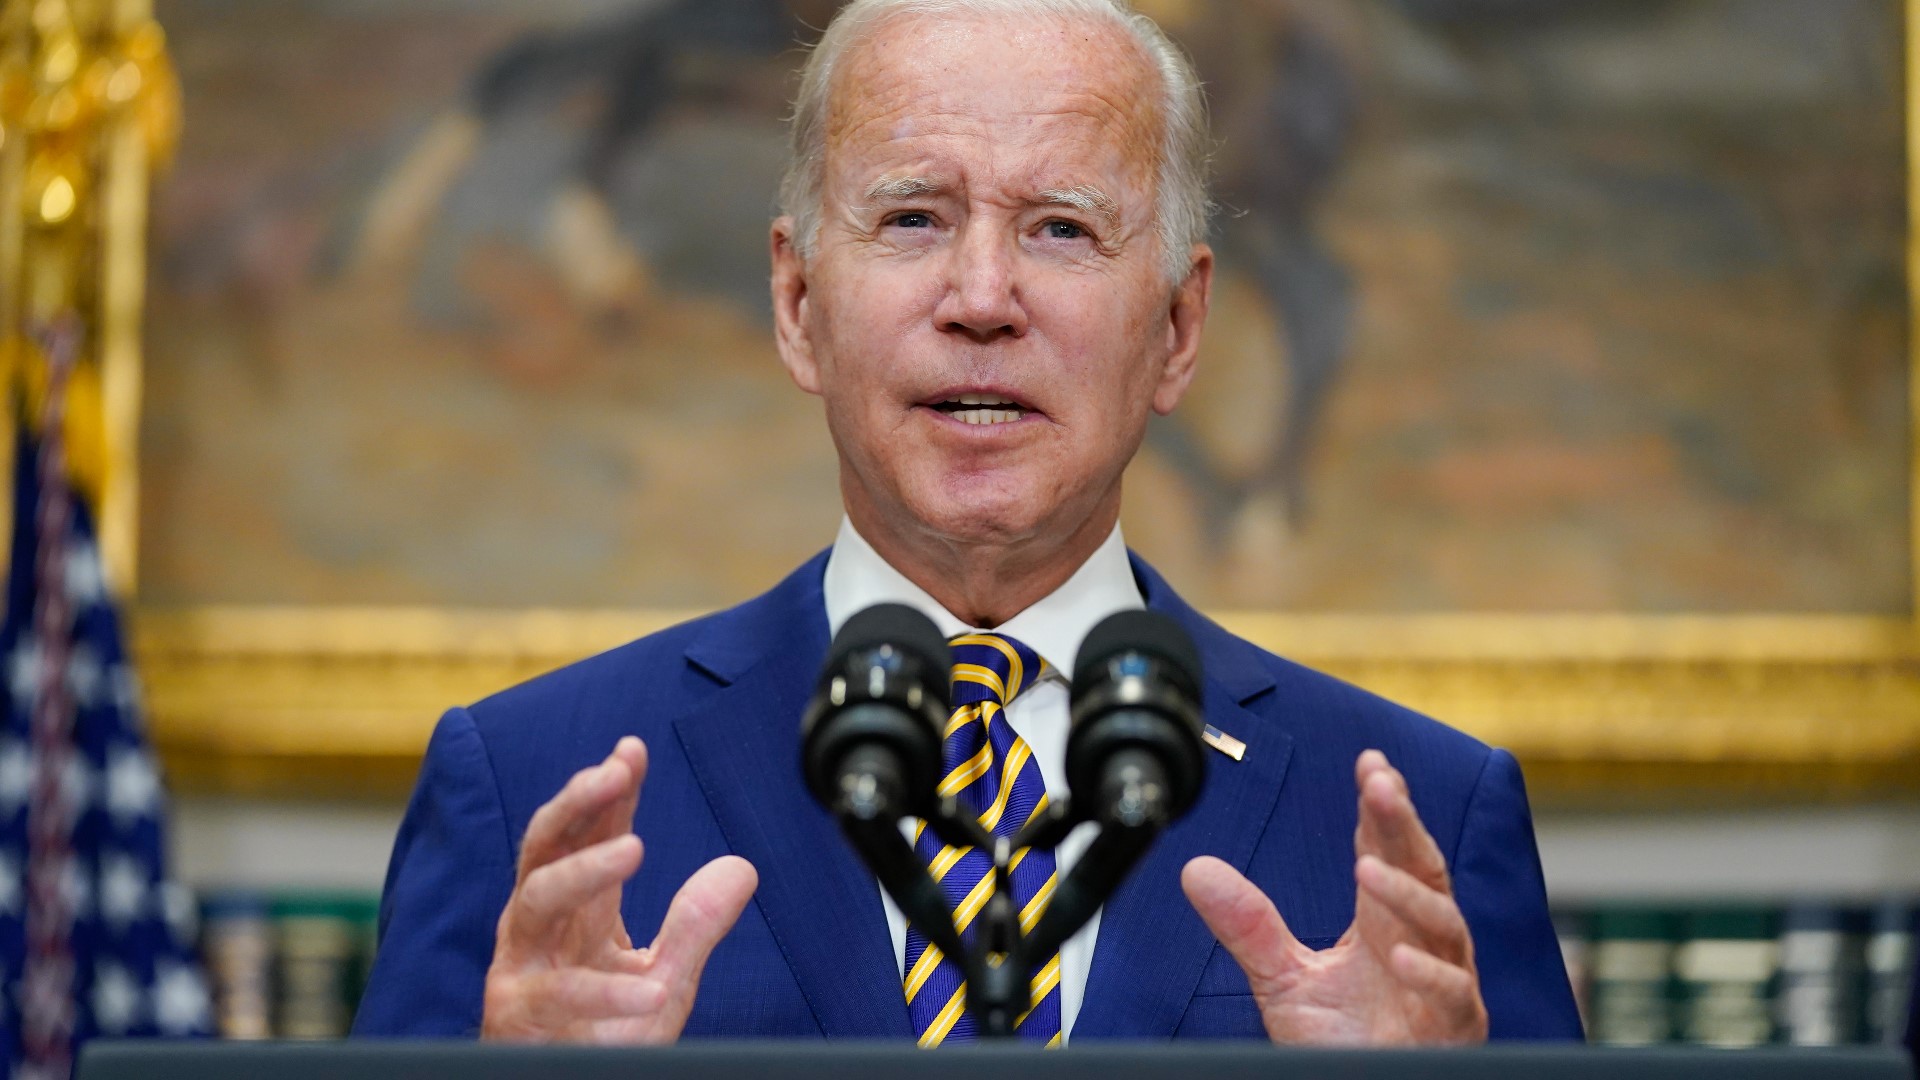 Today, President Joe Biden pledged to wipe away thousands of dollars of college debt and the administration is also proposing big changes to the repayment programs.